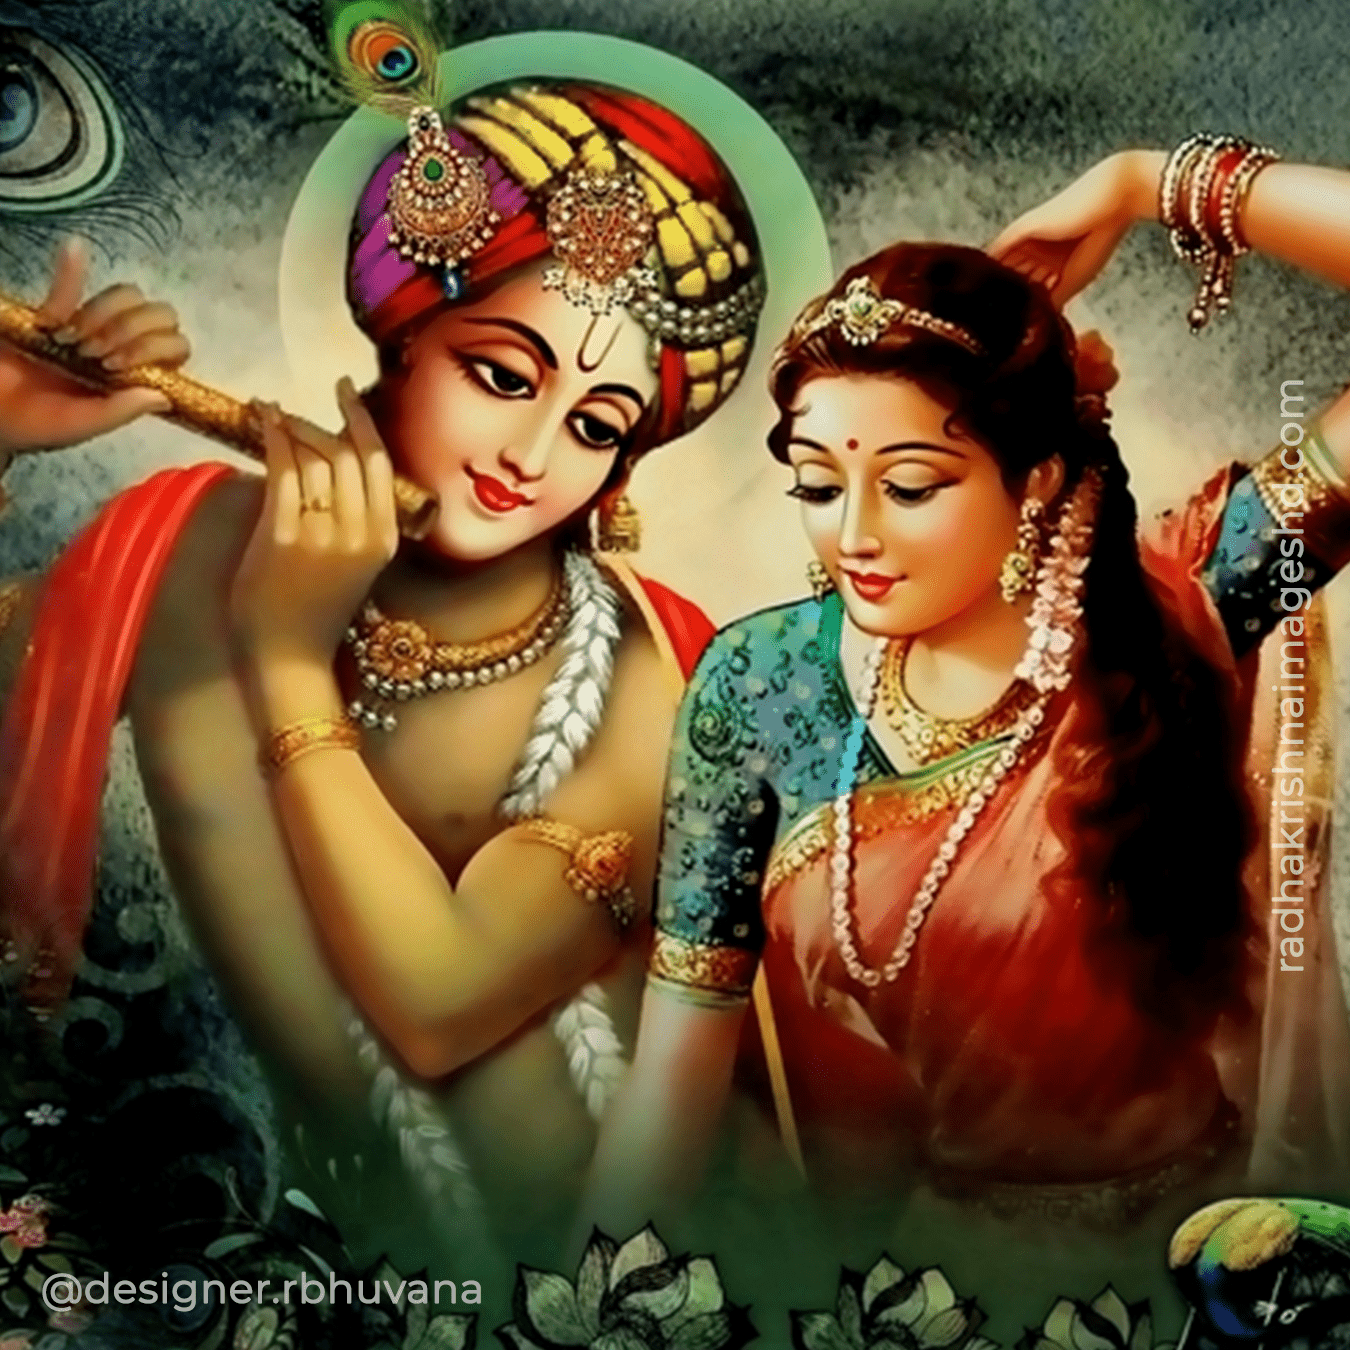 Download the Amazing Collection of Full 4K Radha Krishna Images HD – Over 999+ Images Available